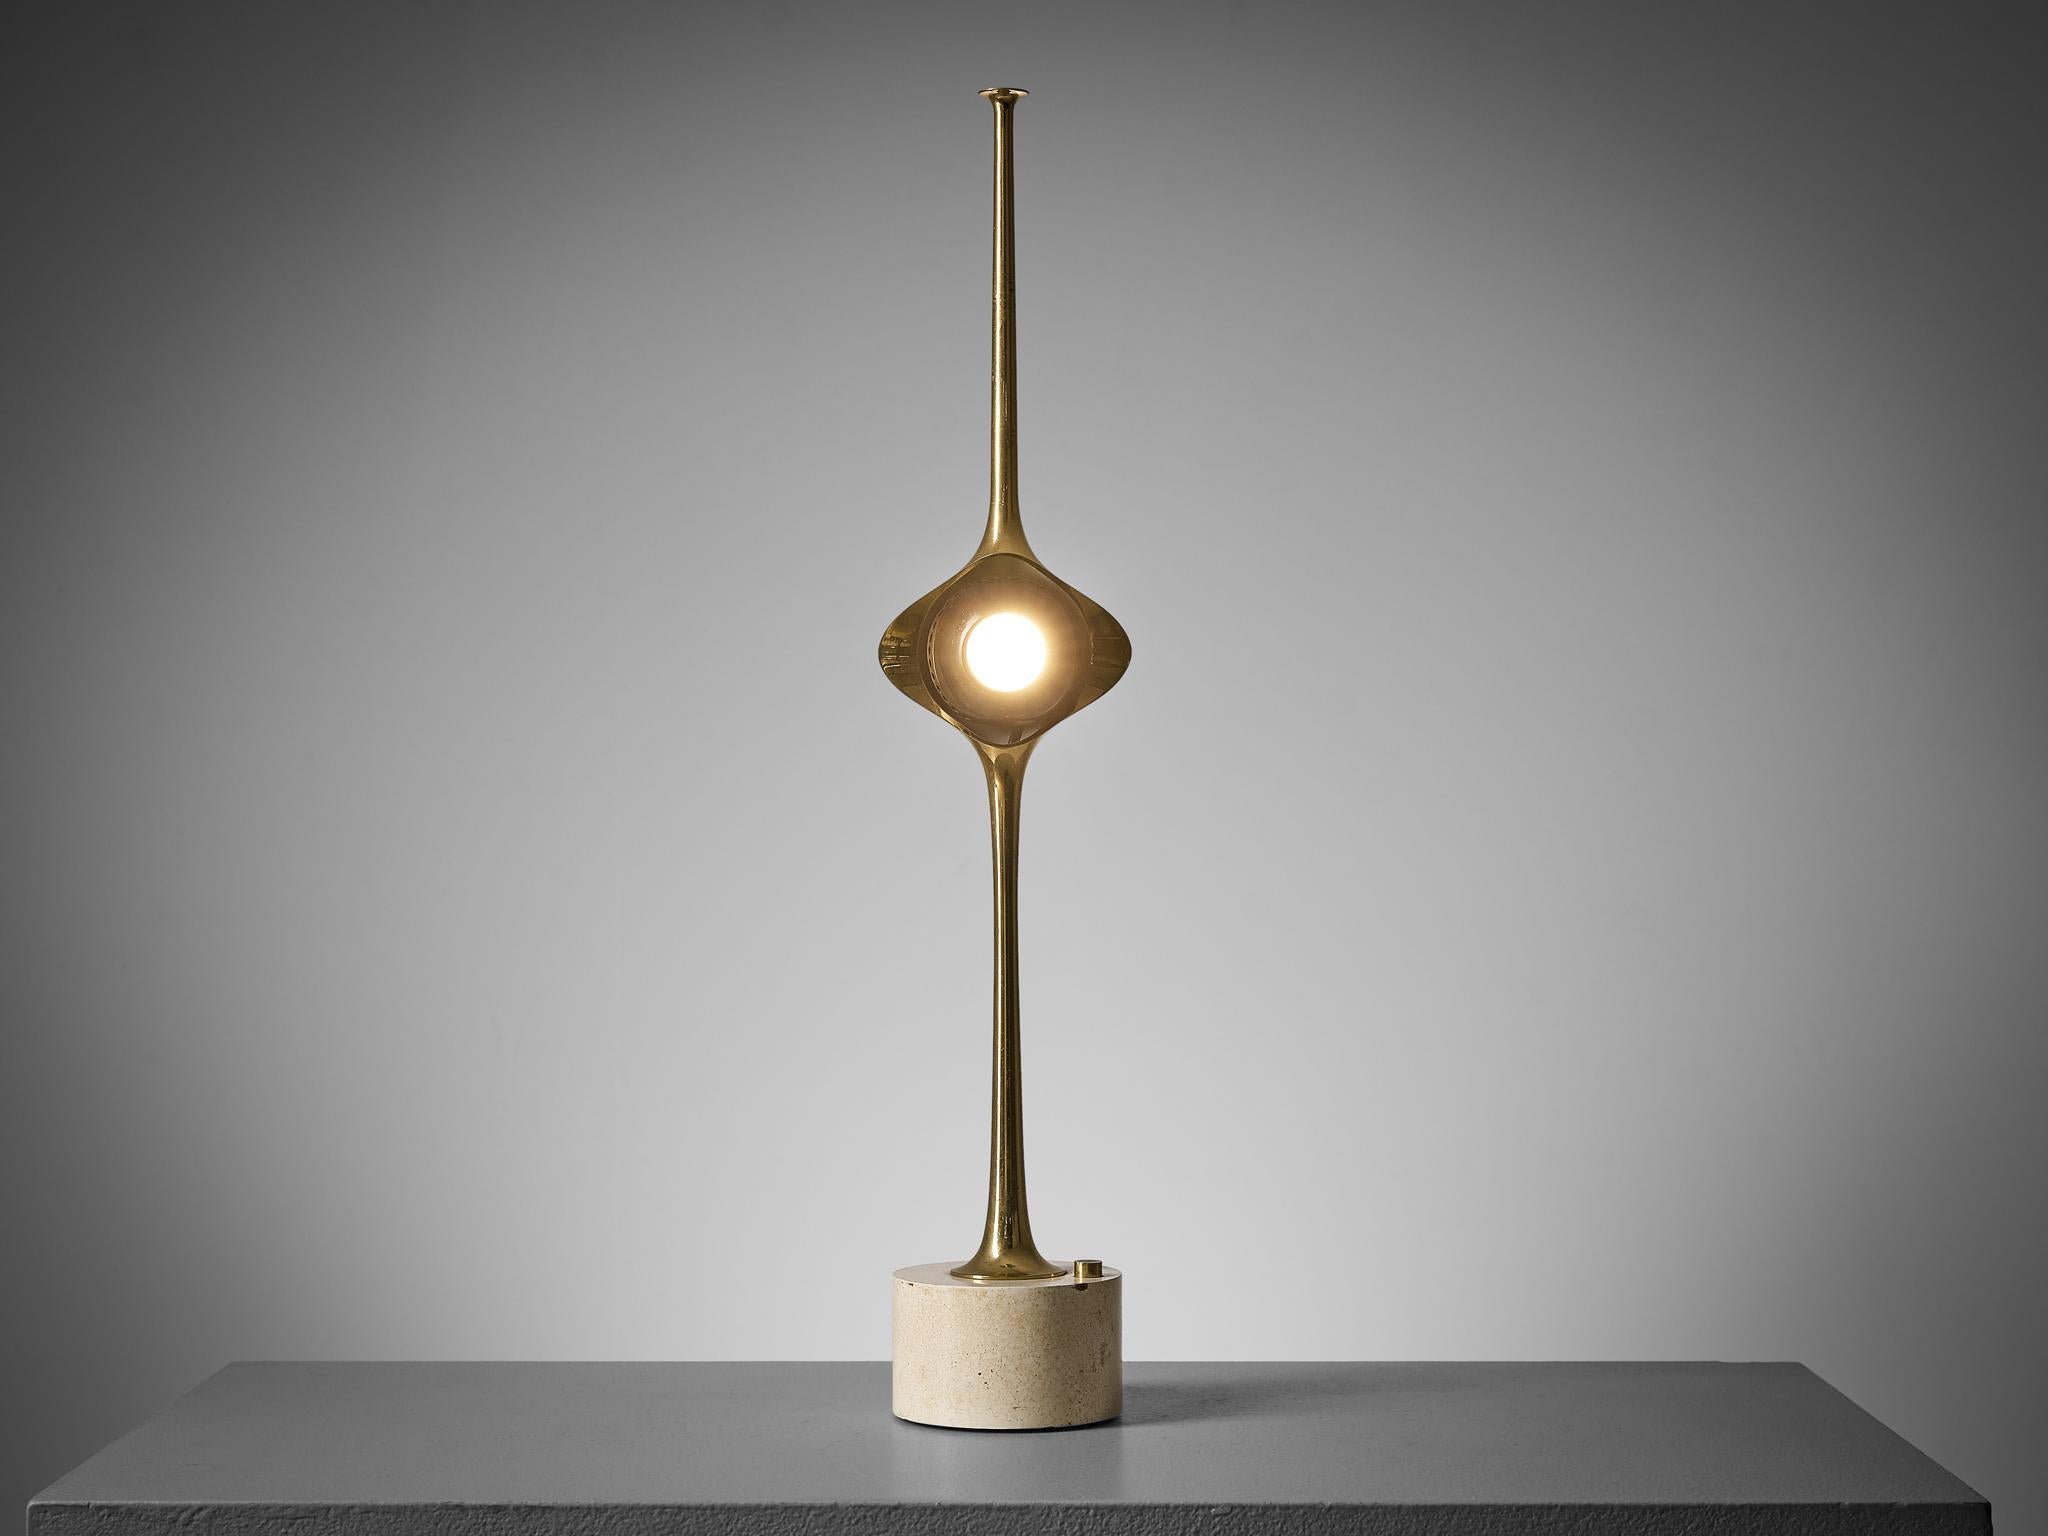 Angelo Lelli for Arredoluce, ‘Cobra’ table lamp model ‘12919’, brass, iron, steel, Italy, 1962. 

This outstanding table lamp model ‘12919’ known as ‘il Cobra’ is designed by Italian designer Angelo Lelii (1911-1979) for Arredoluce in 1962. In